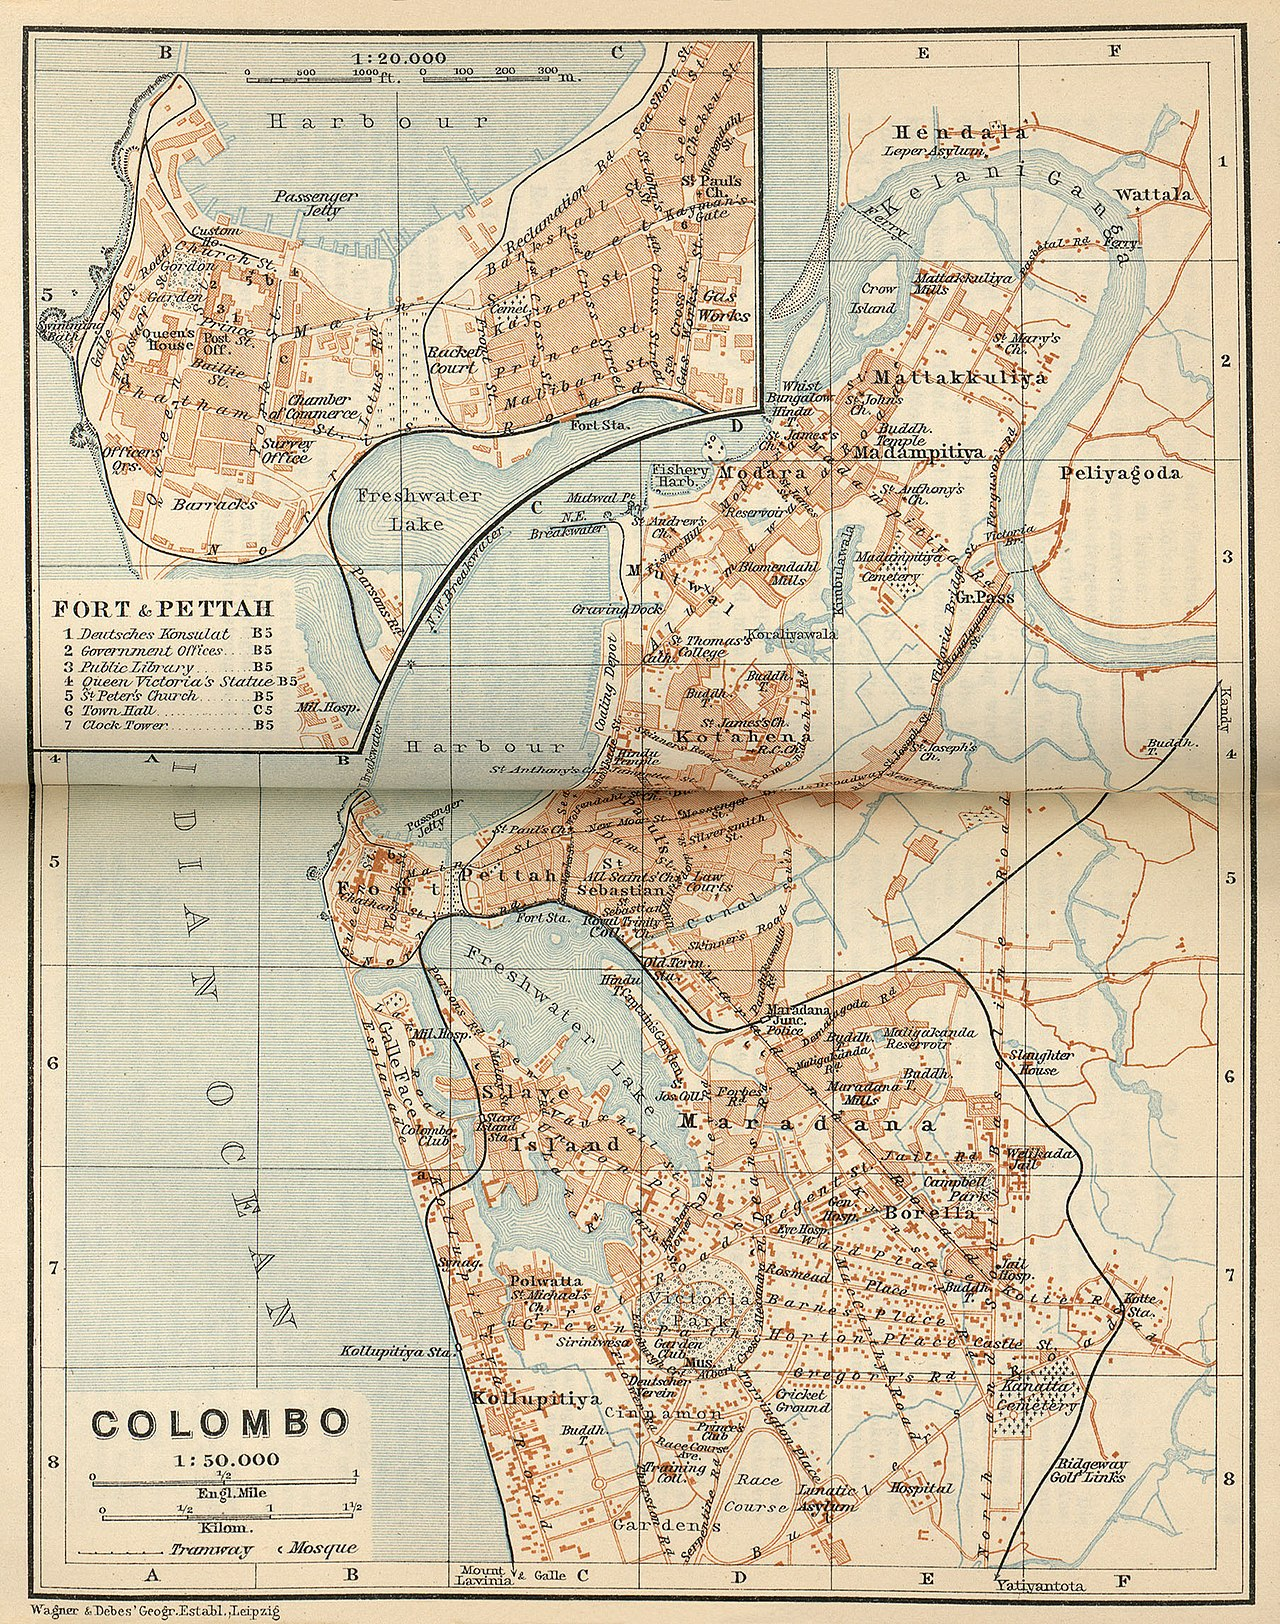 1914 Map of Colombo showing the tramway routes